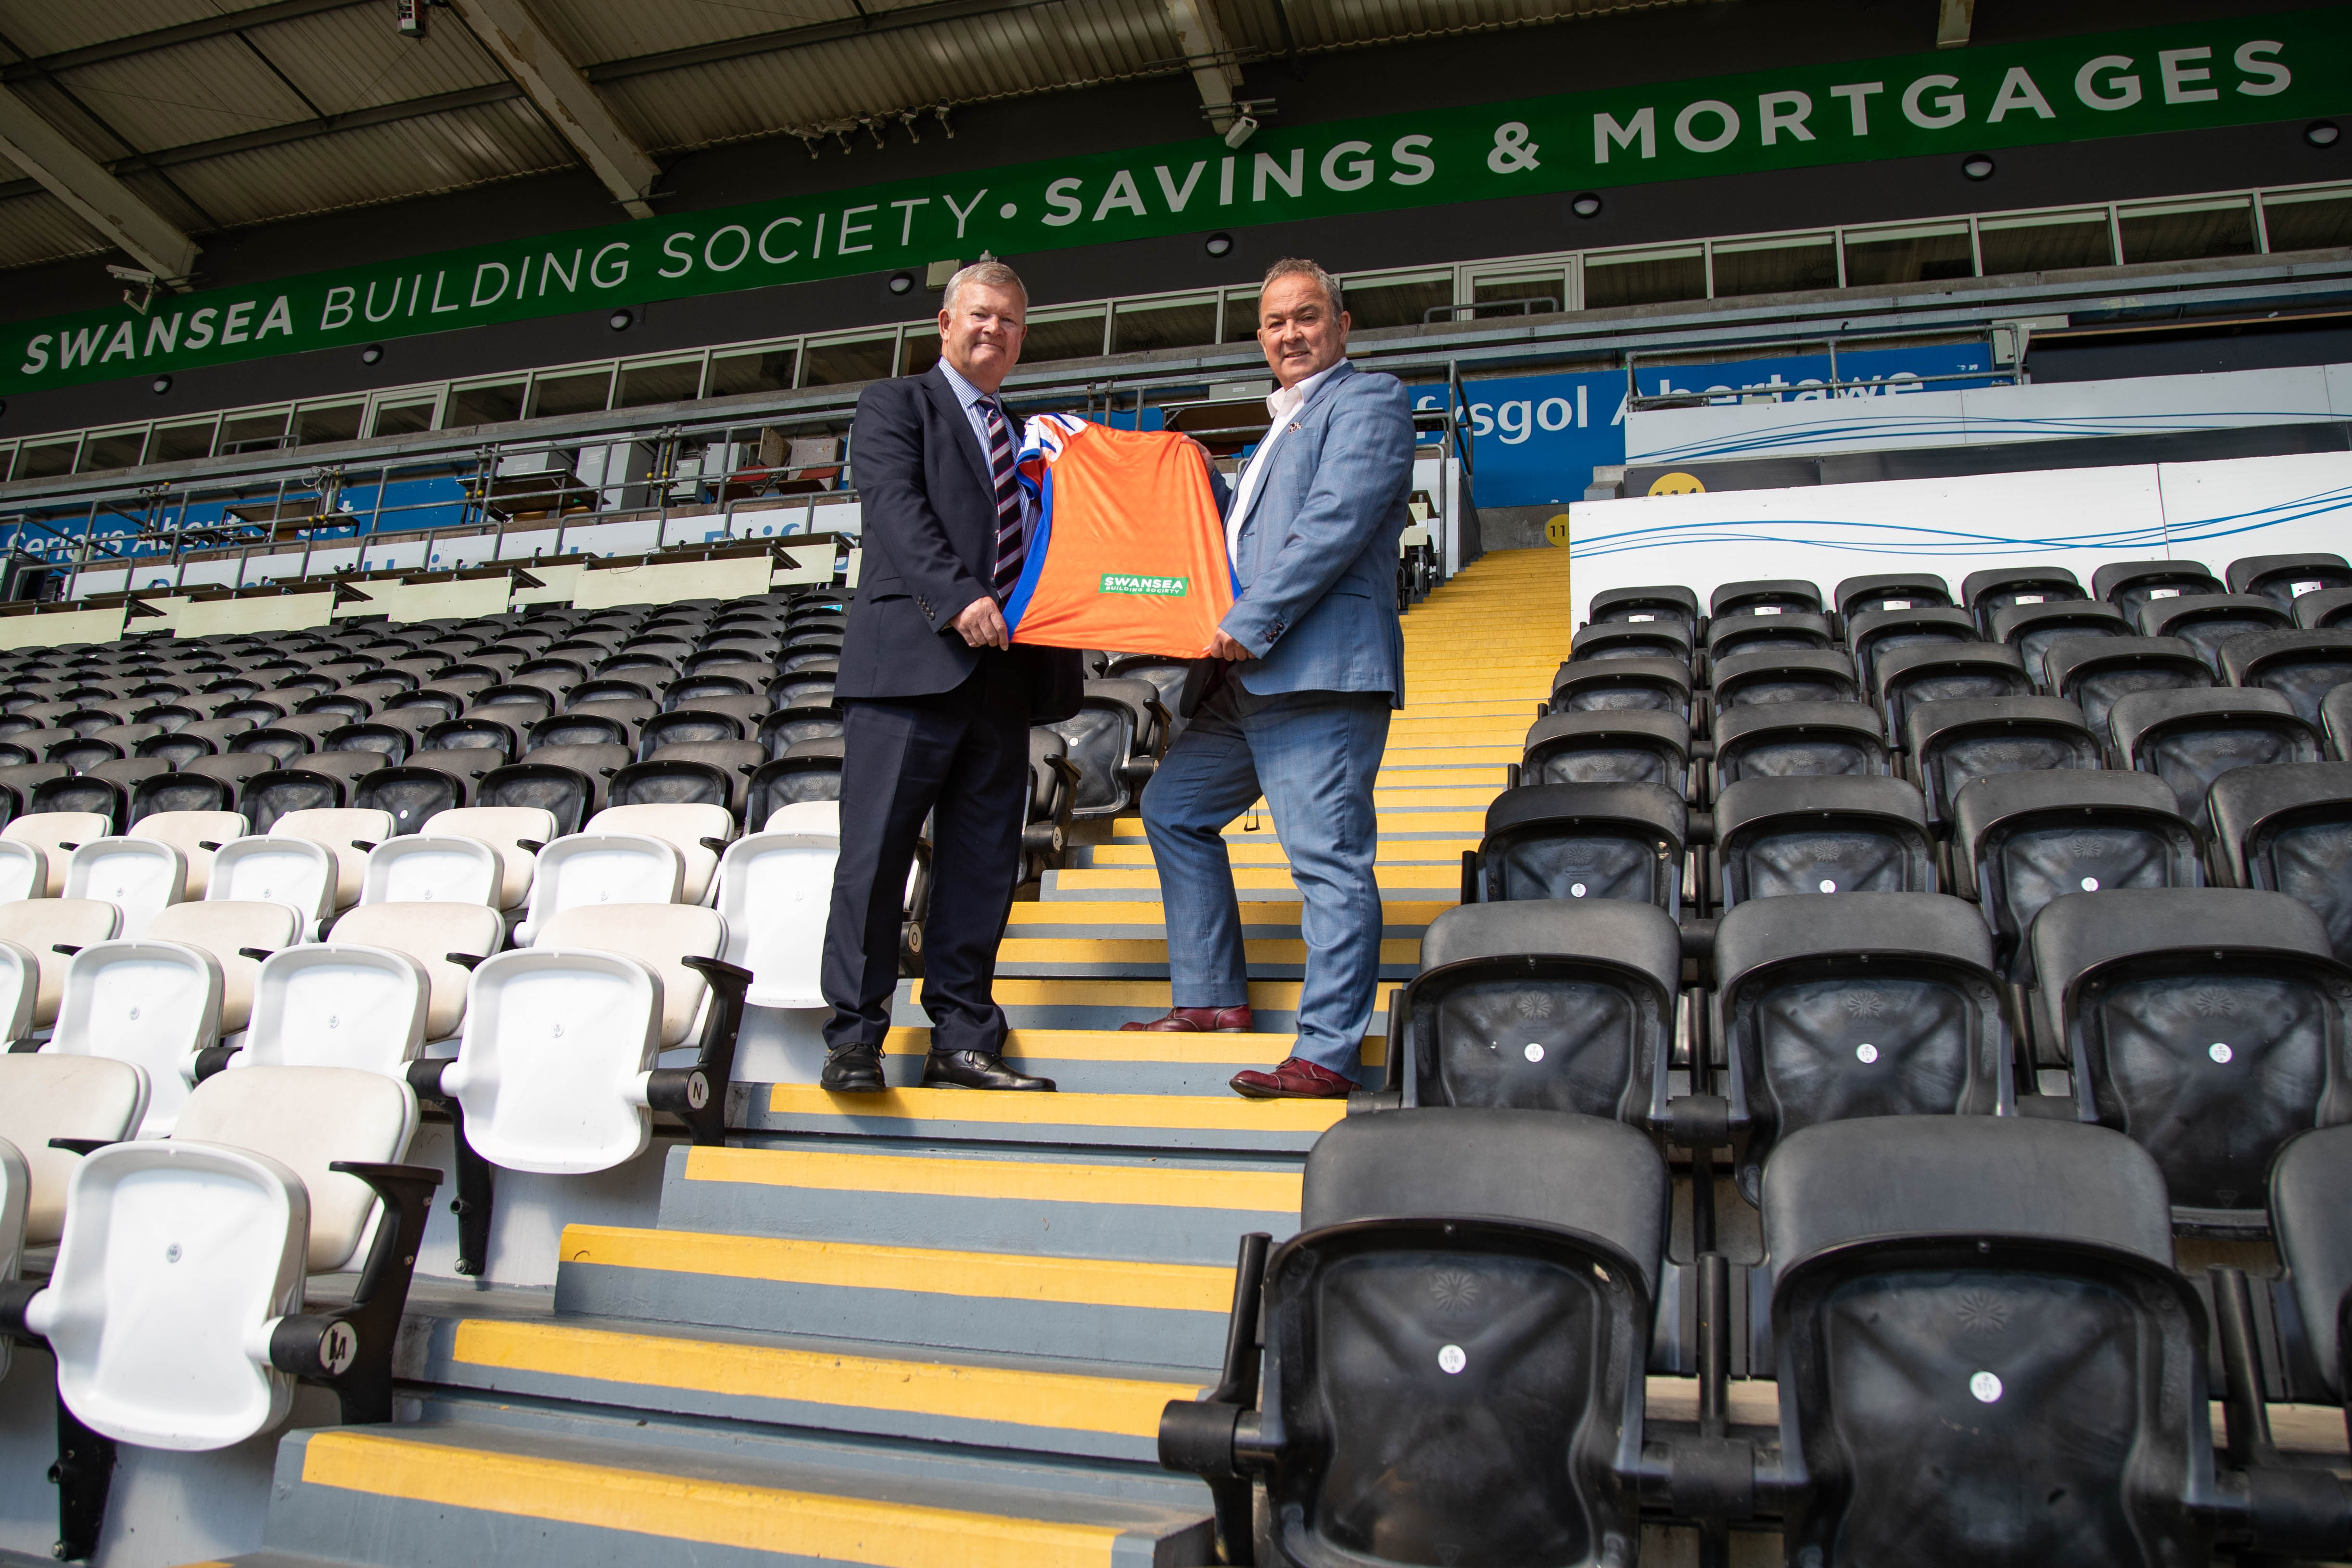 We renew our commitment to Swansea City AFC